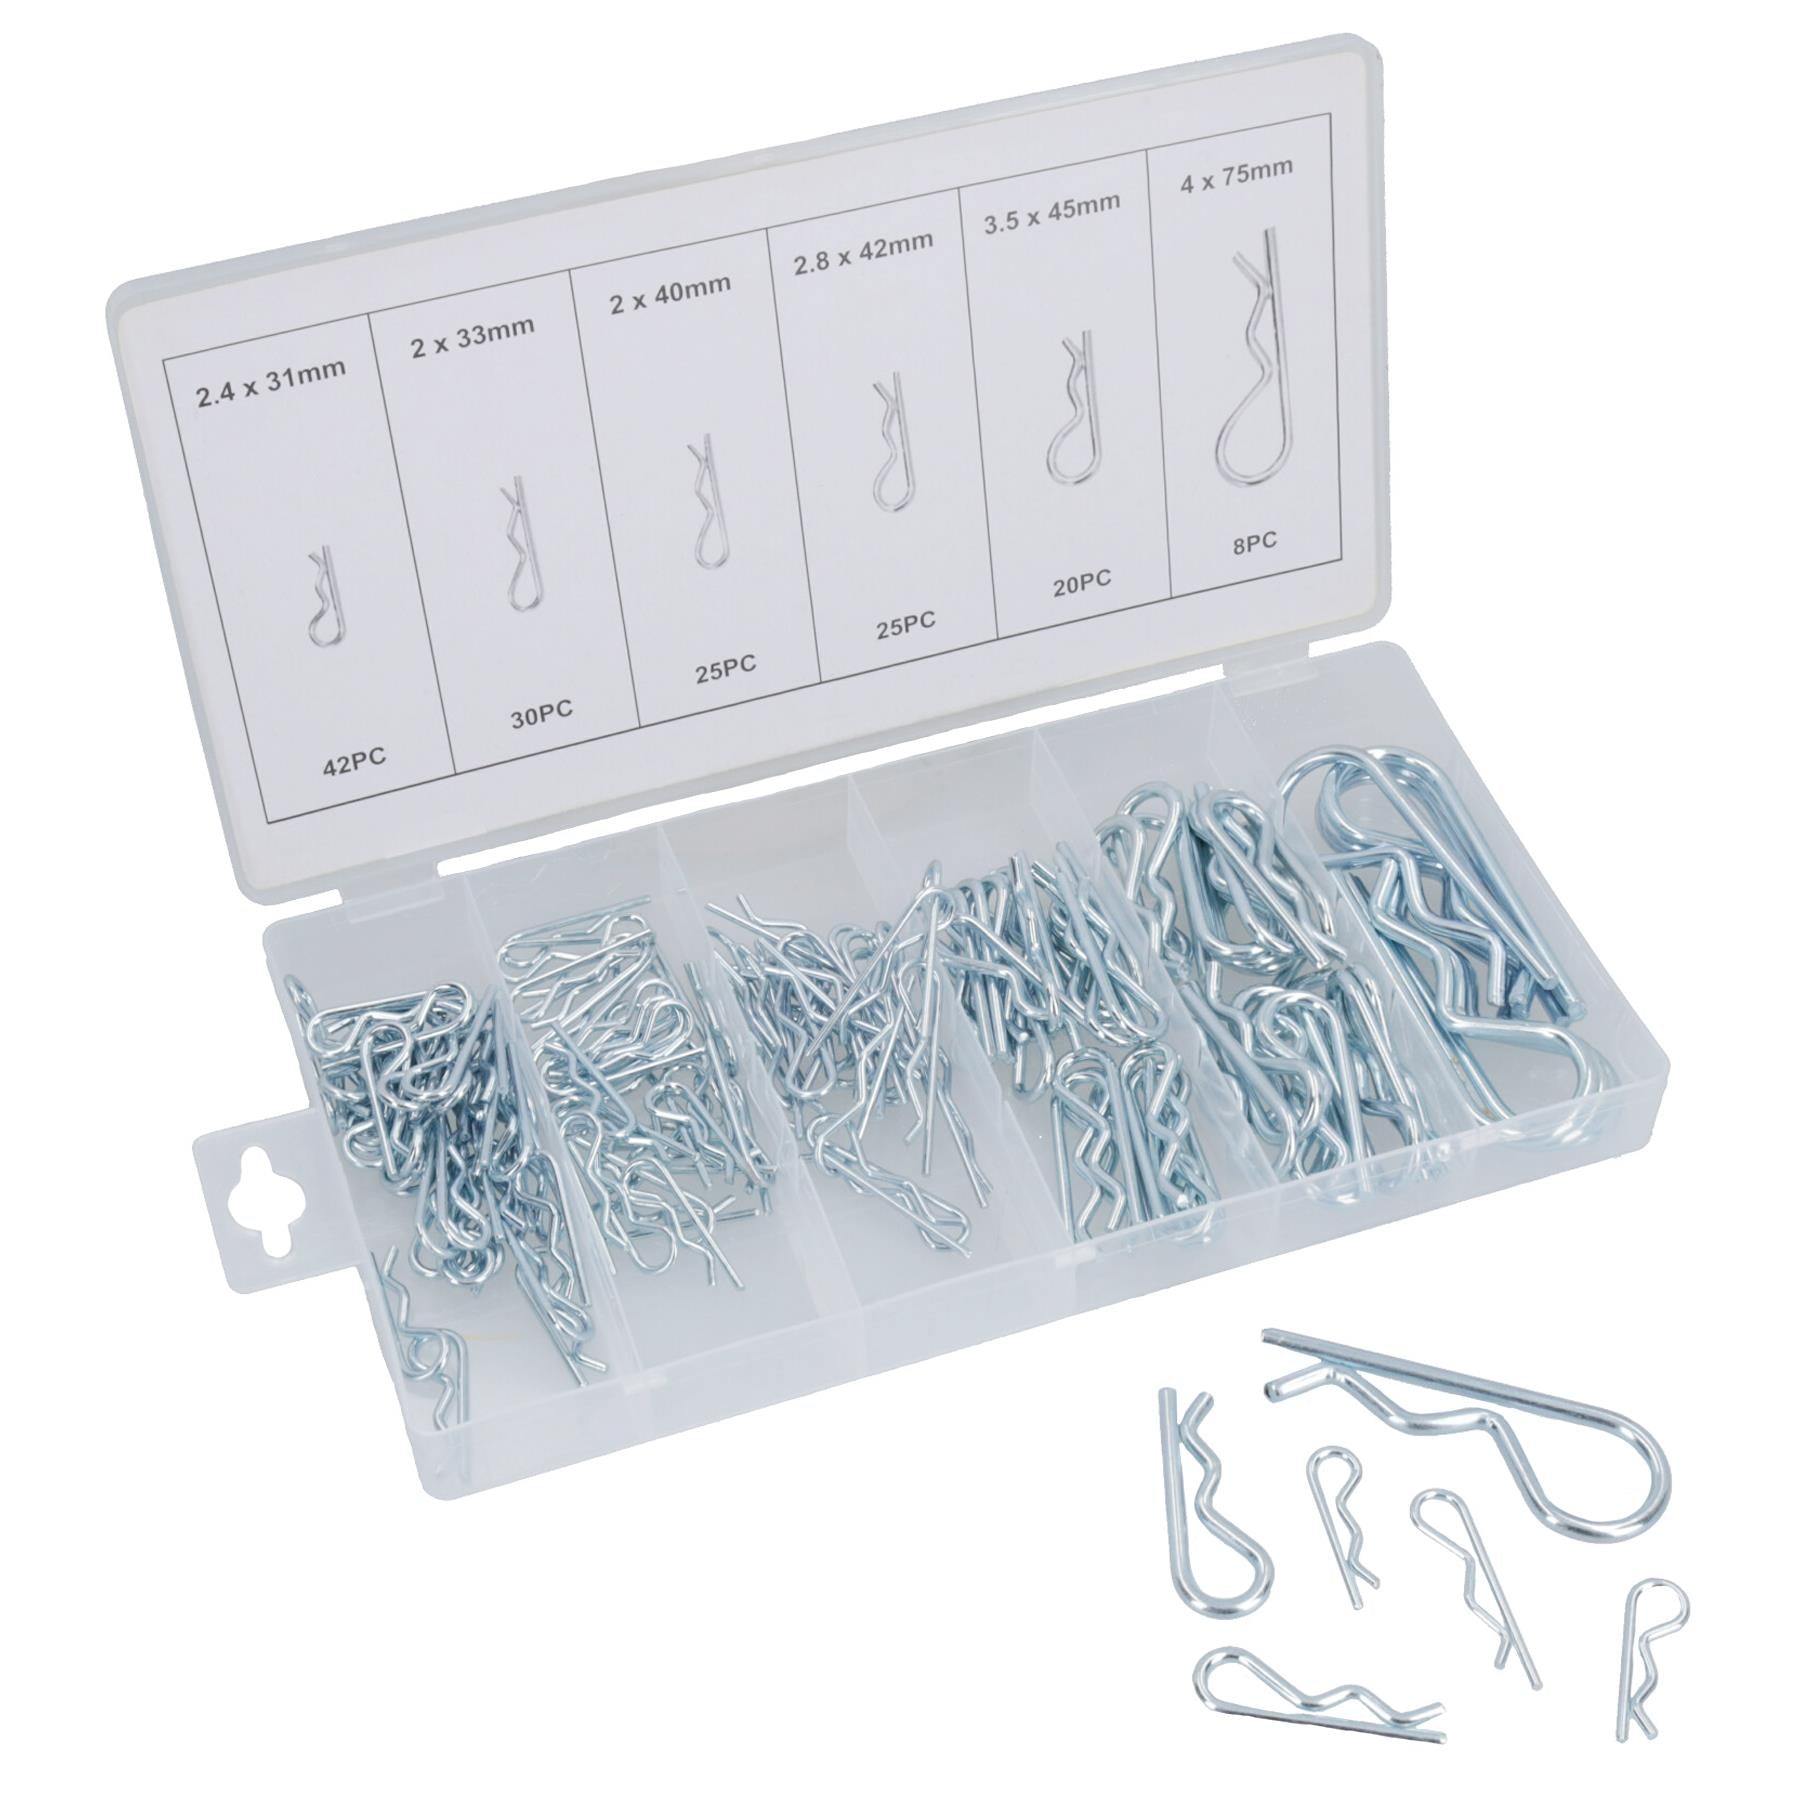 R Clips Hair Pin Hitch Lynch Cotter Assortment Kit 150pc AST07